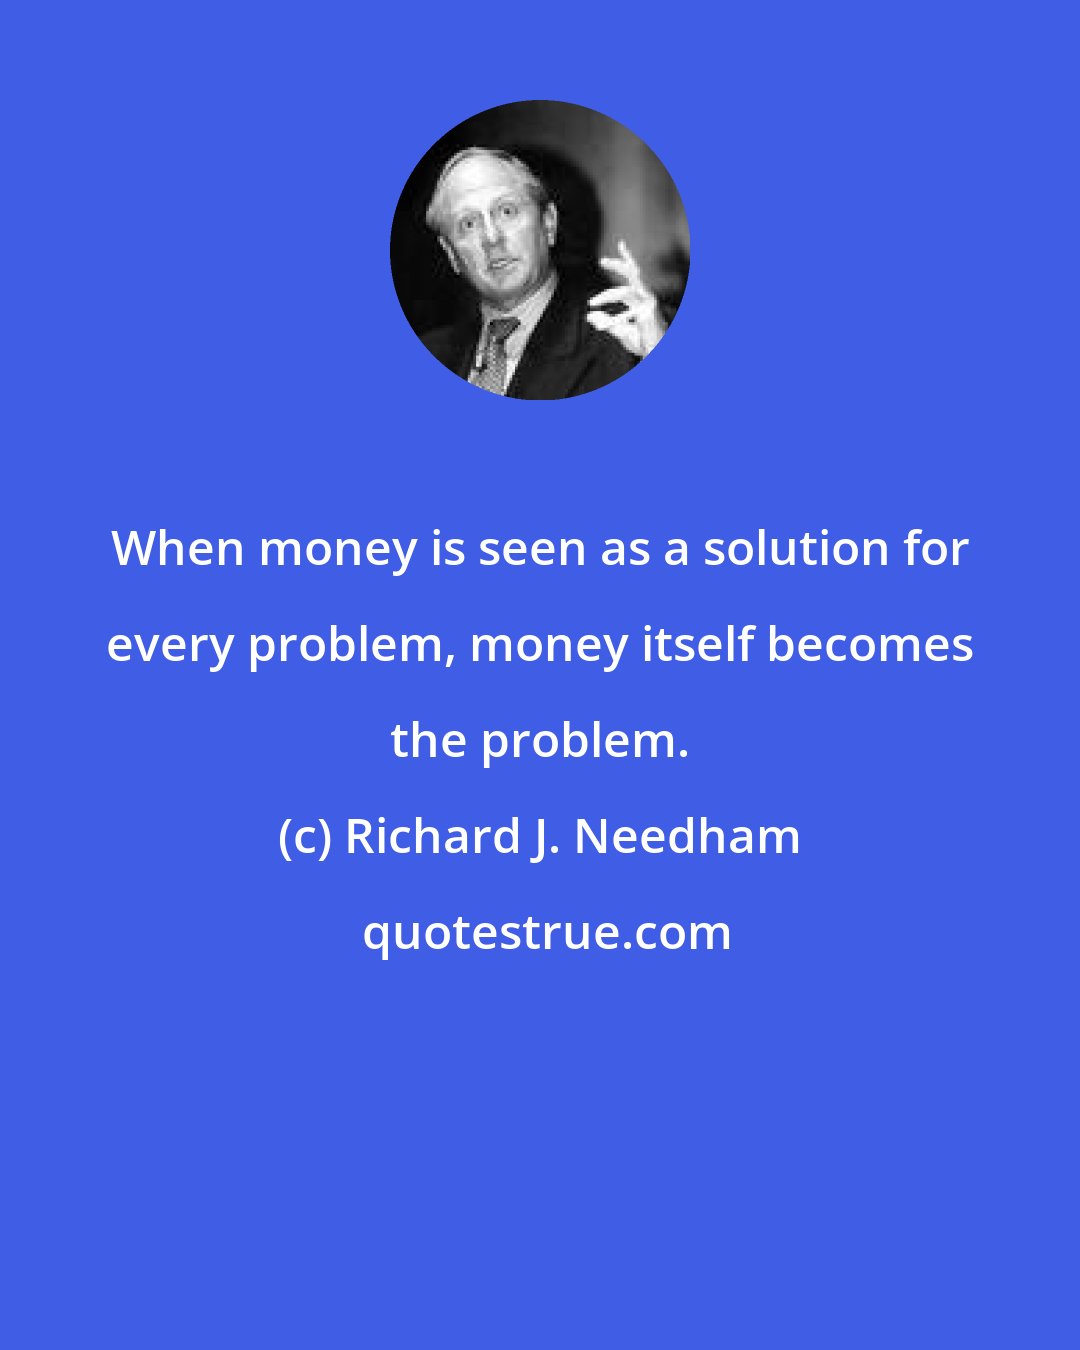 Richard J. Needham: When money is seen as a solution for every problem, money itself becomes the problem.